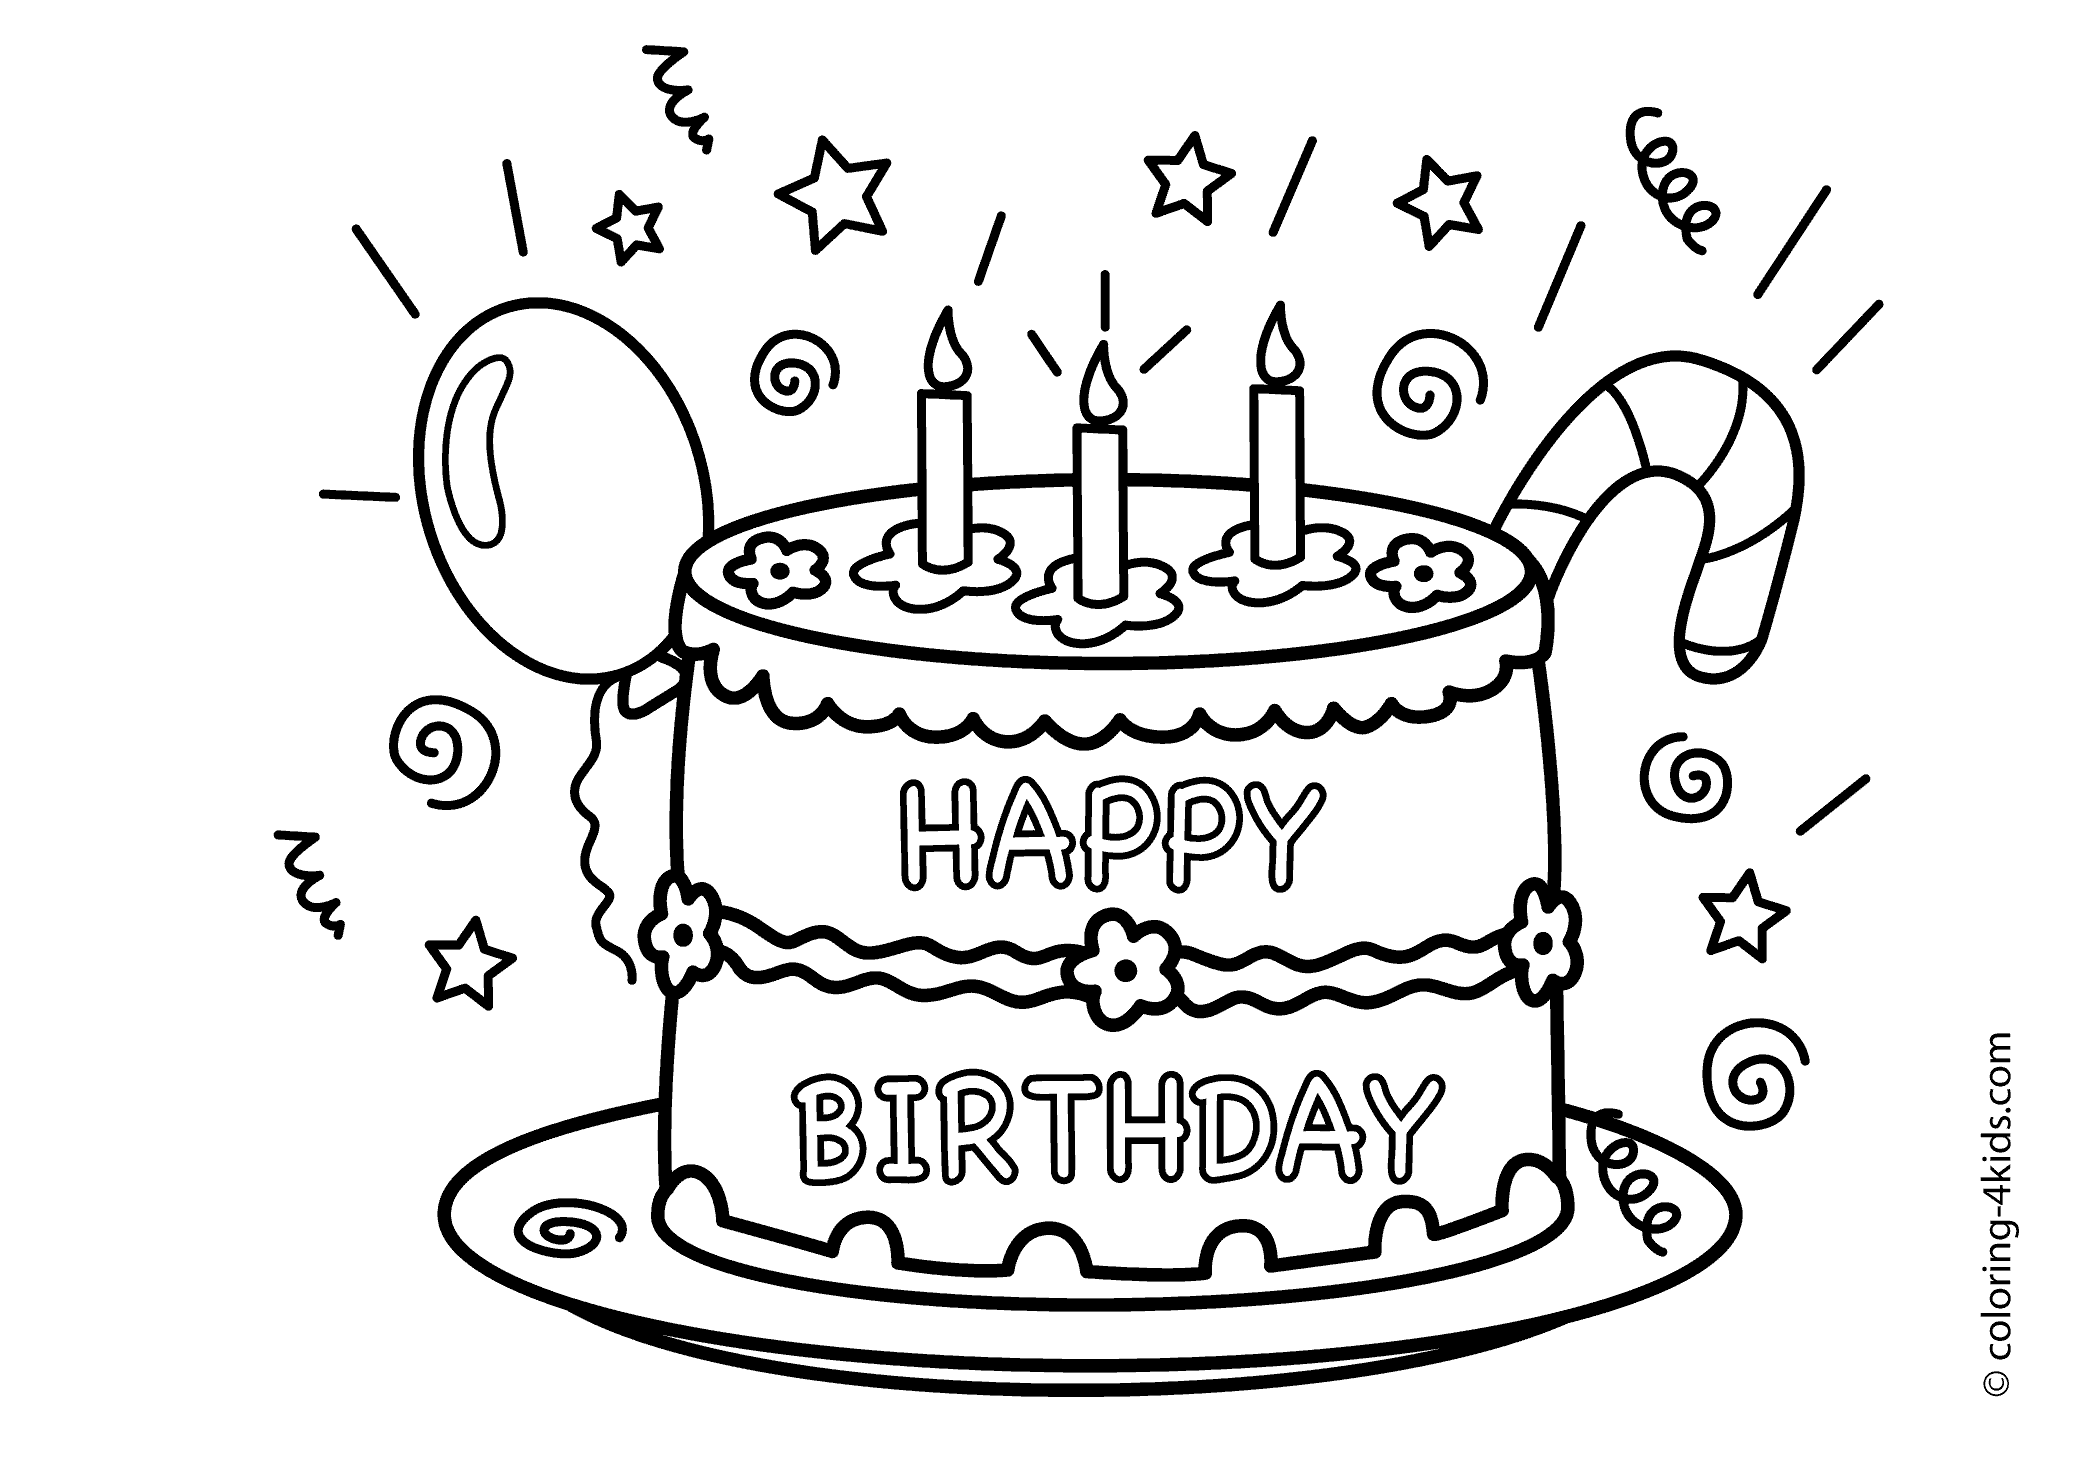 teddy bear birthday cake coloring pages birthday cake.